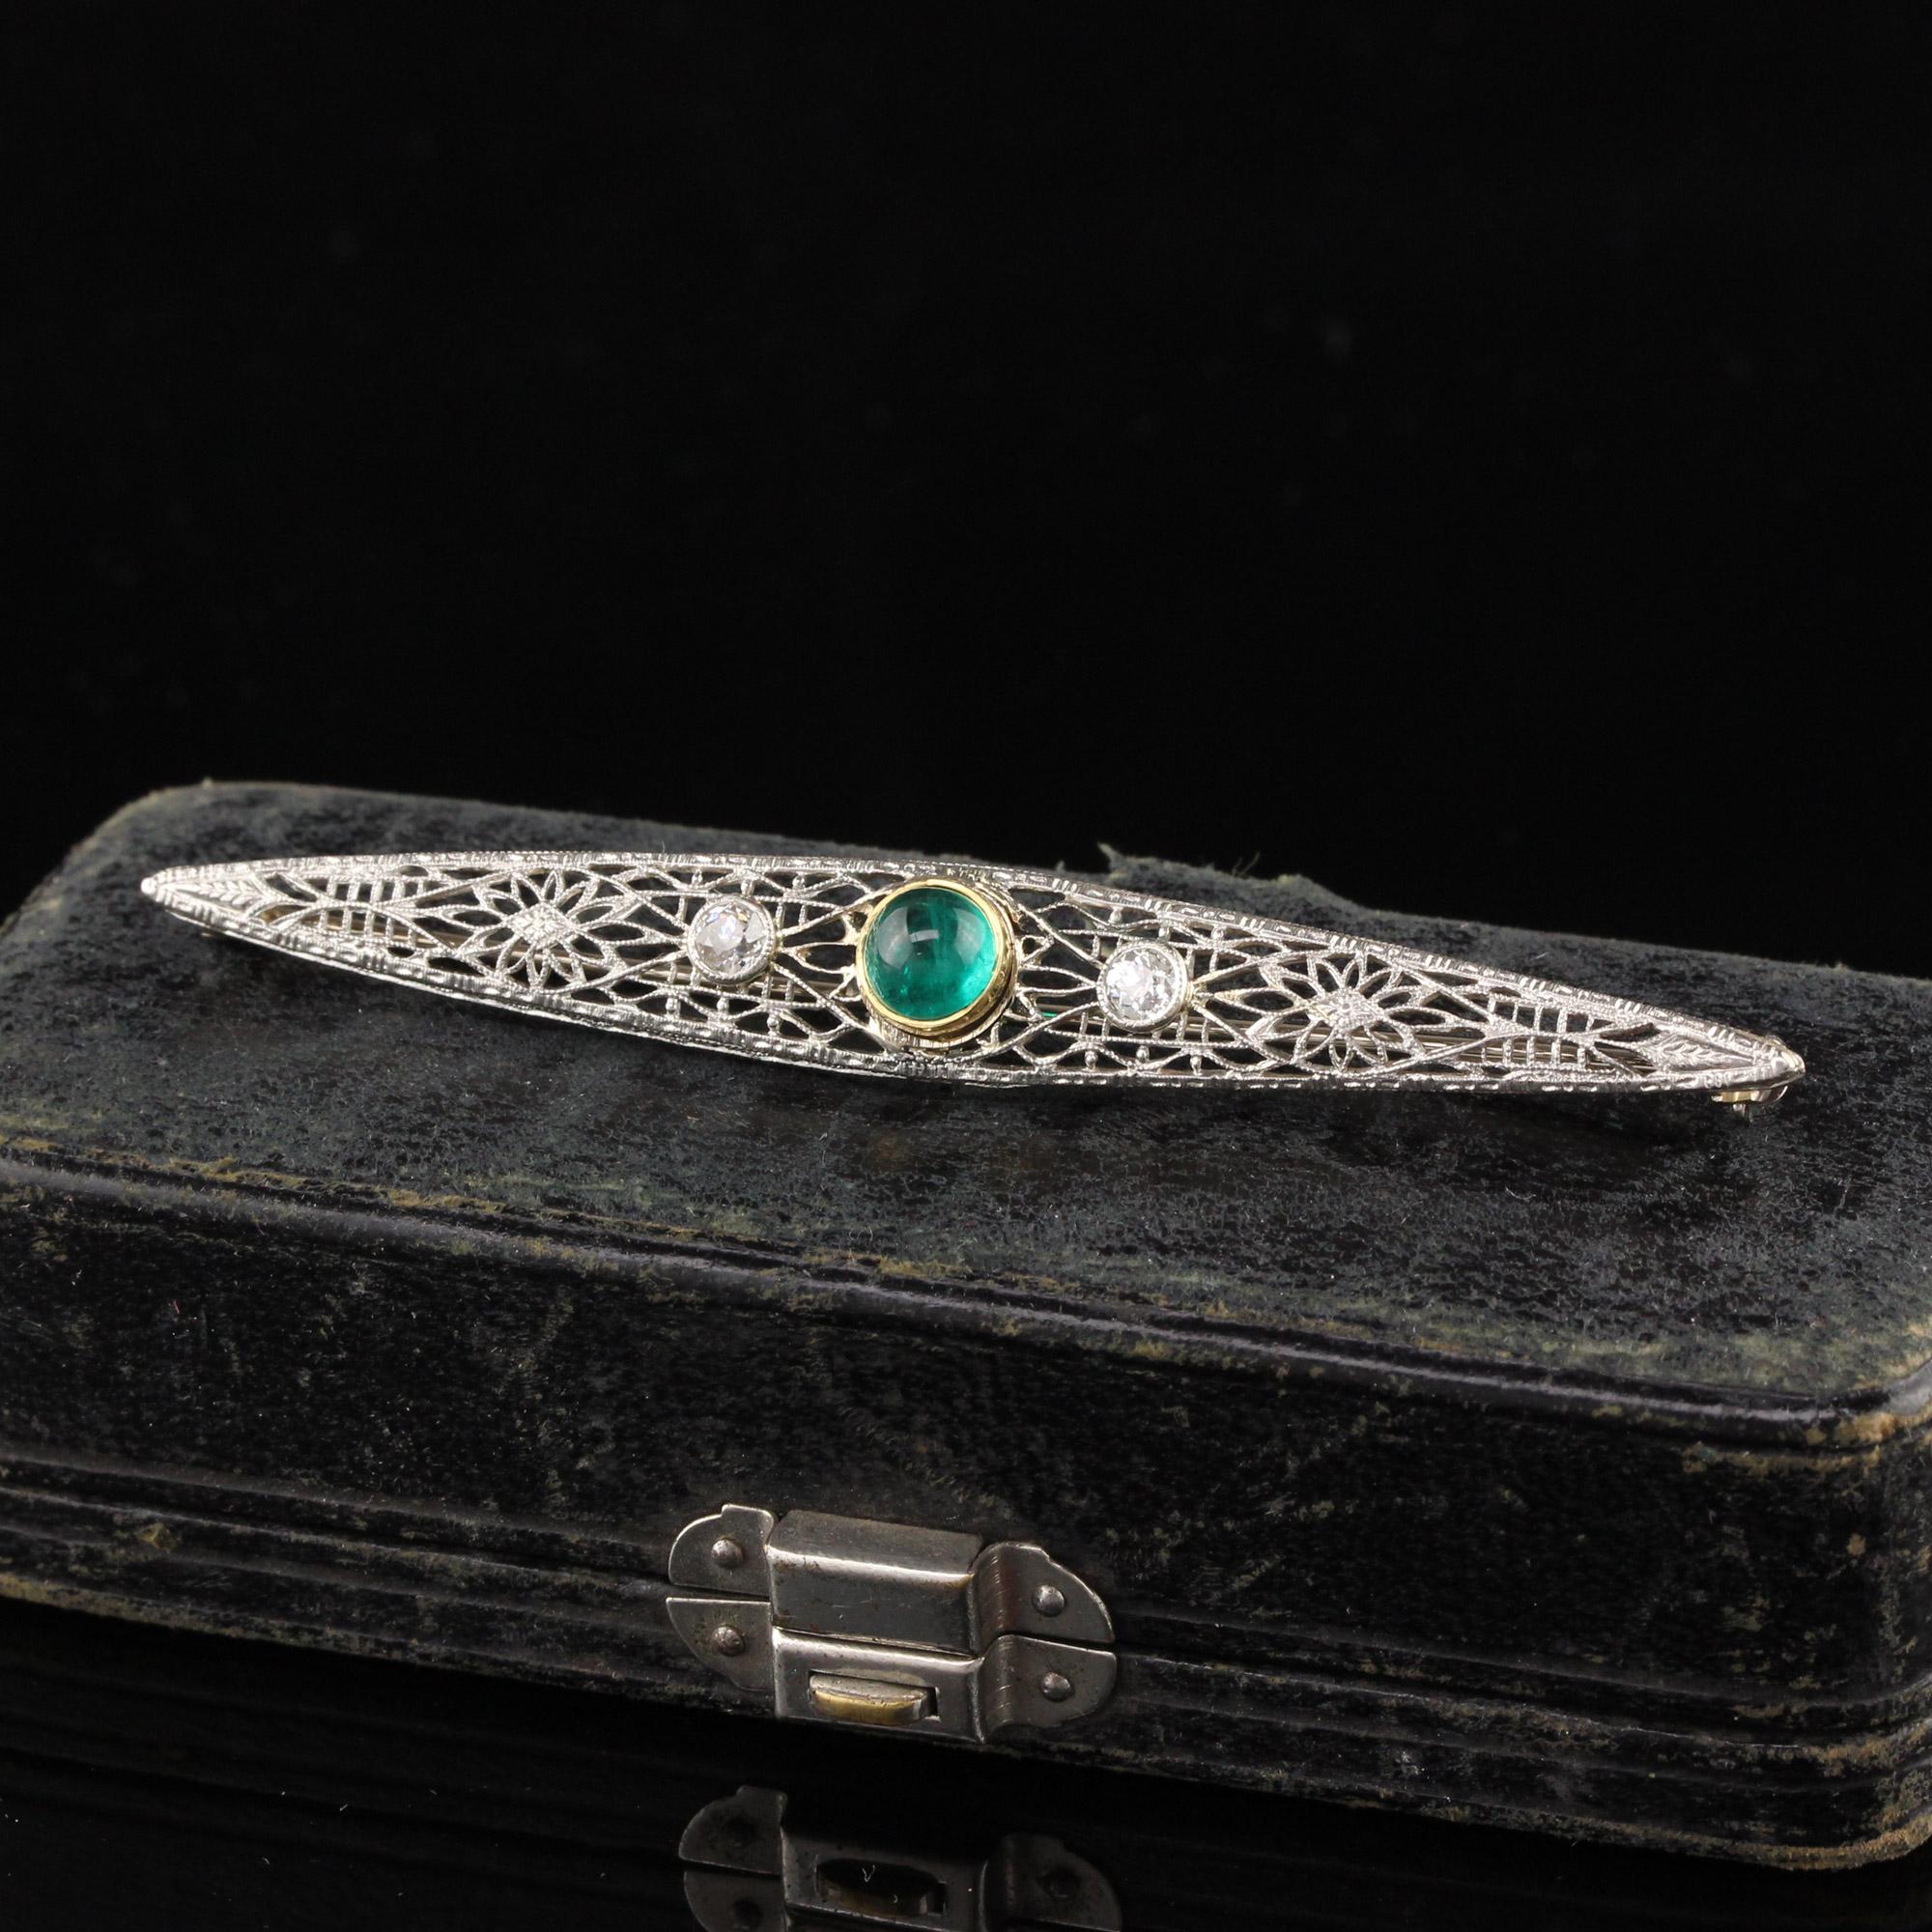 Beautiful Antique Art Deco 14K White Gold Old Euro Diamond Emerald Filigree Pin. This amazing pin is crafted in 14k white gold. The center holds a natural cabochon emerald that is a vibrant green color and has two white old european cut diamonds on